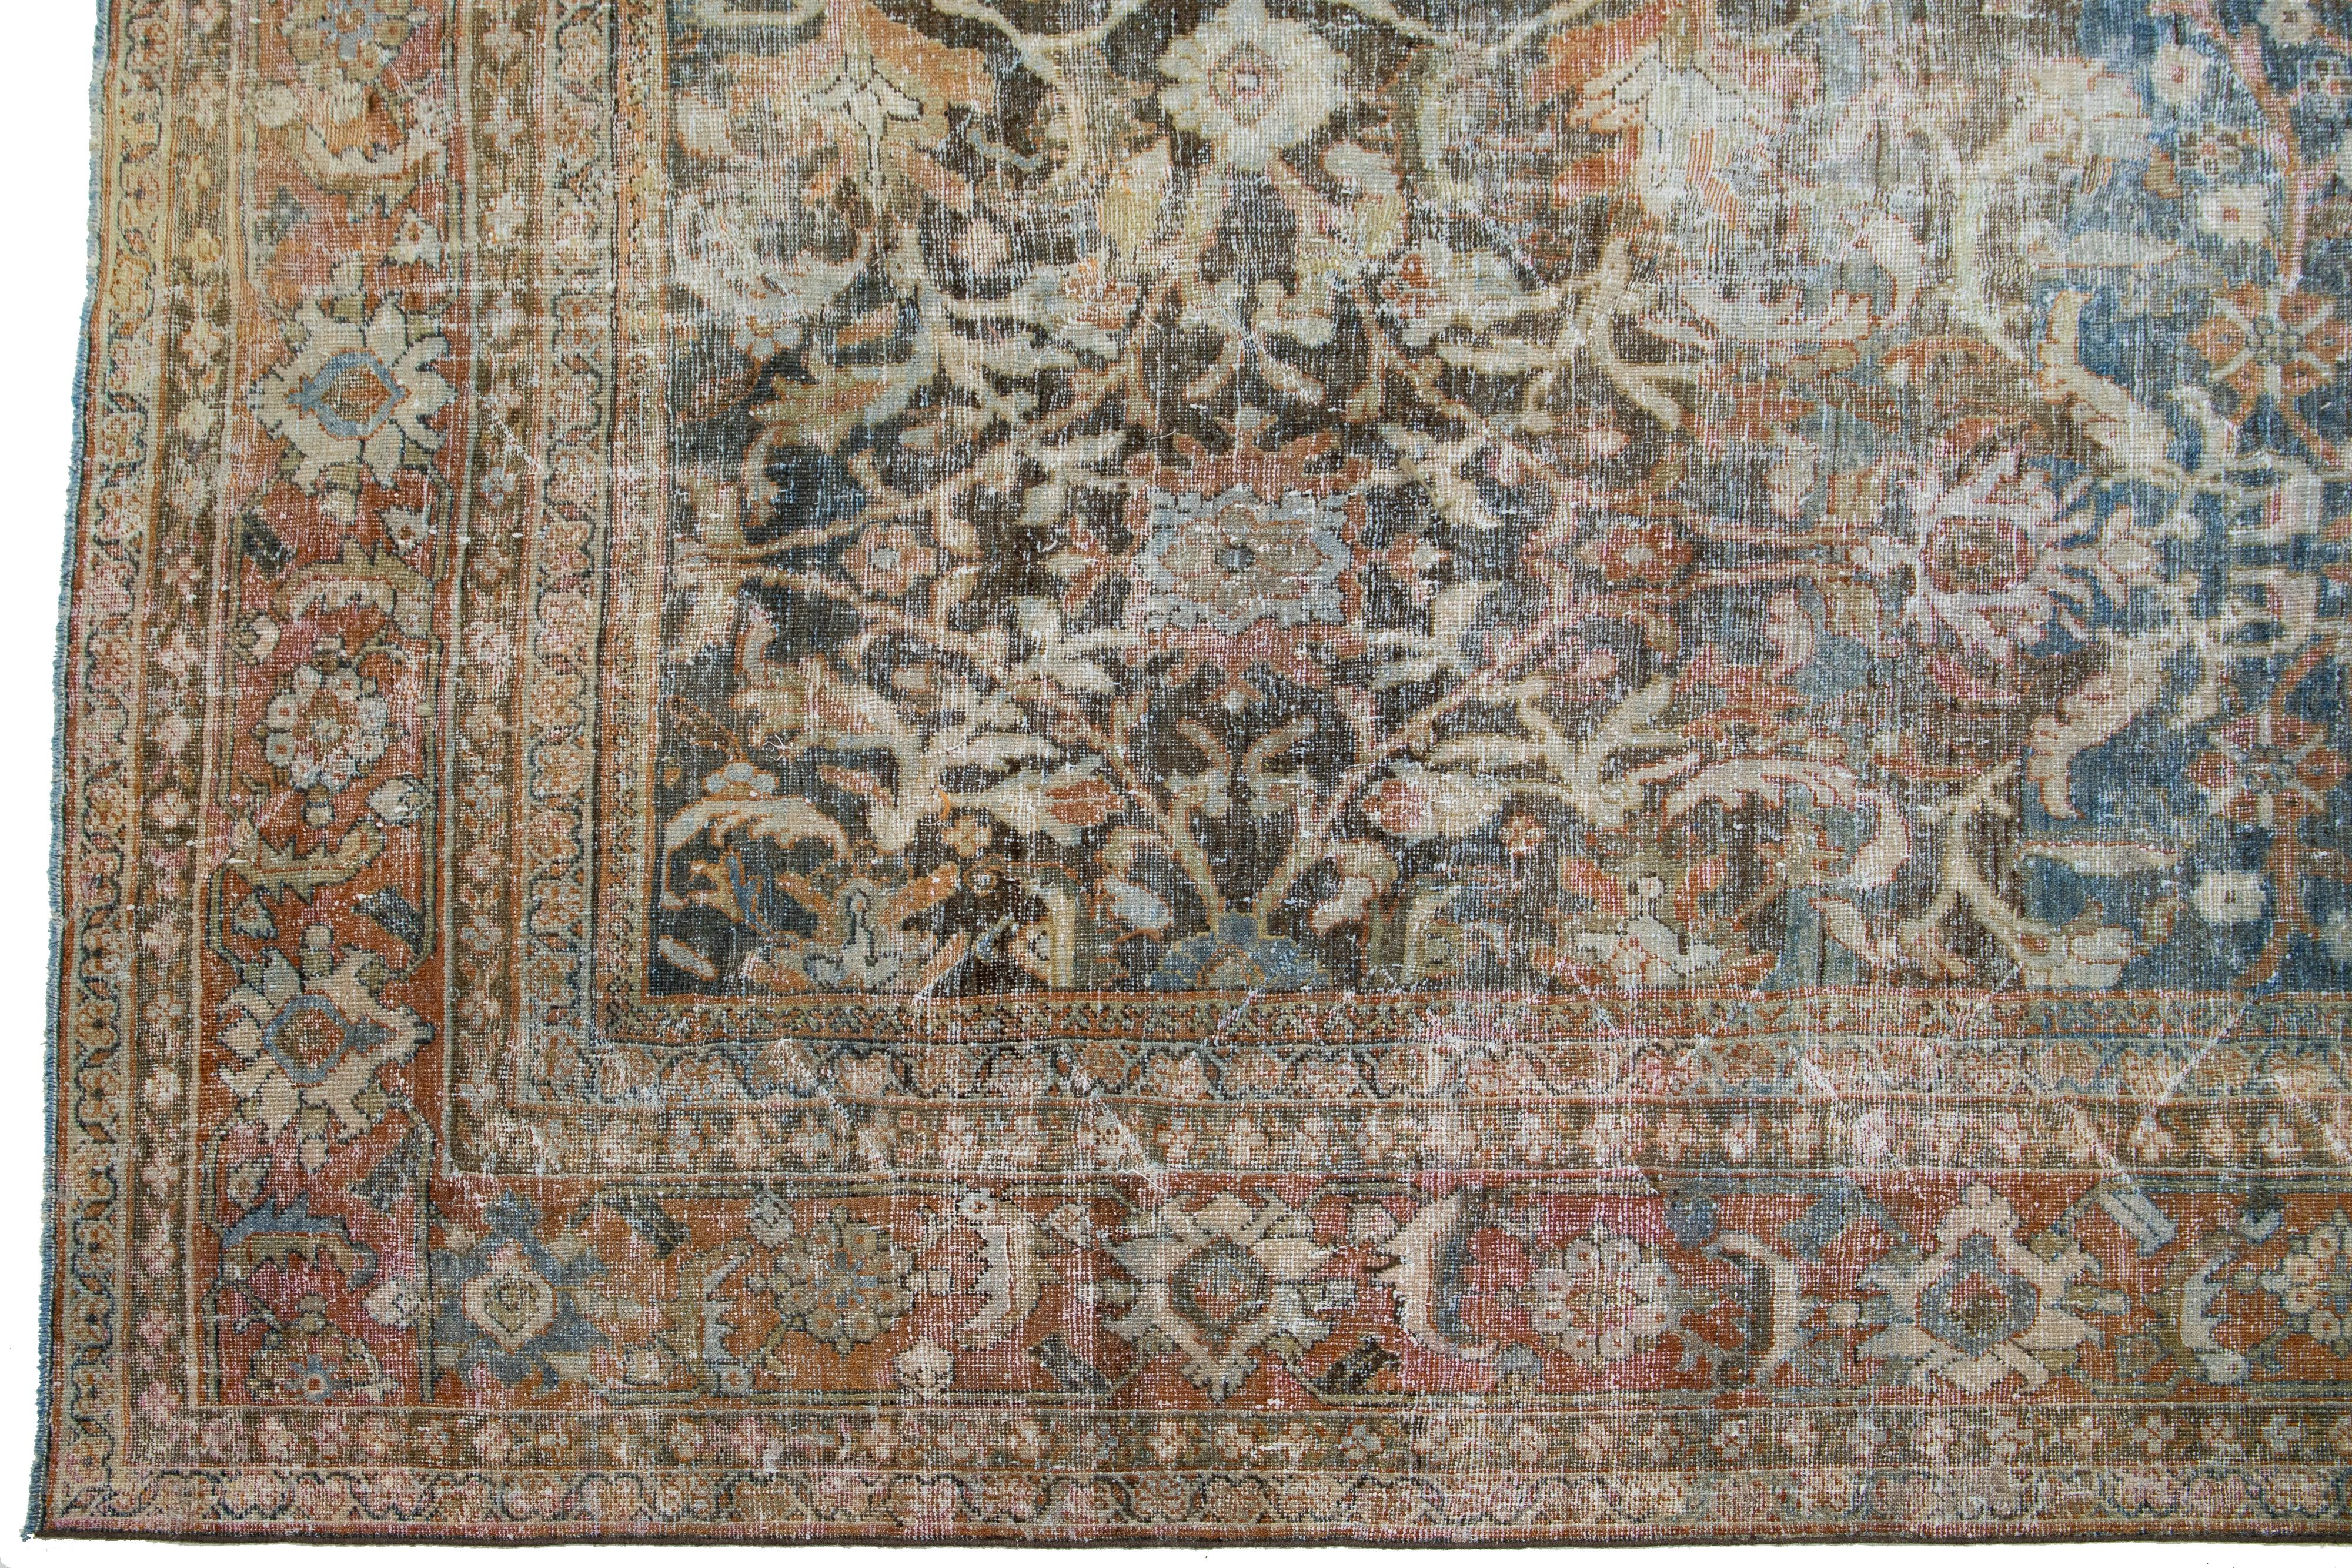 Oversize Blue Persian Antique Mahal Wool Rug with Allover Motif In Good Condition For Sale In Norwalk, CT